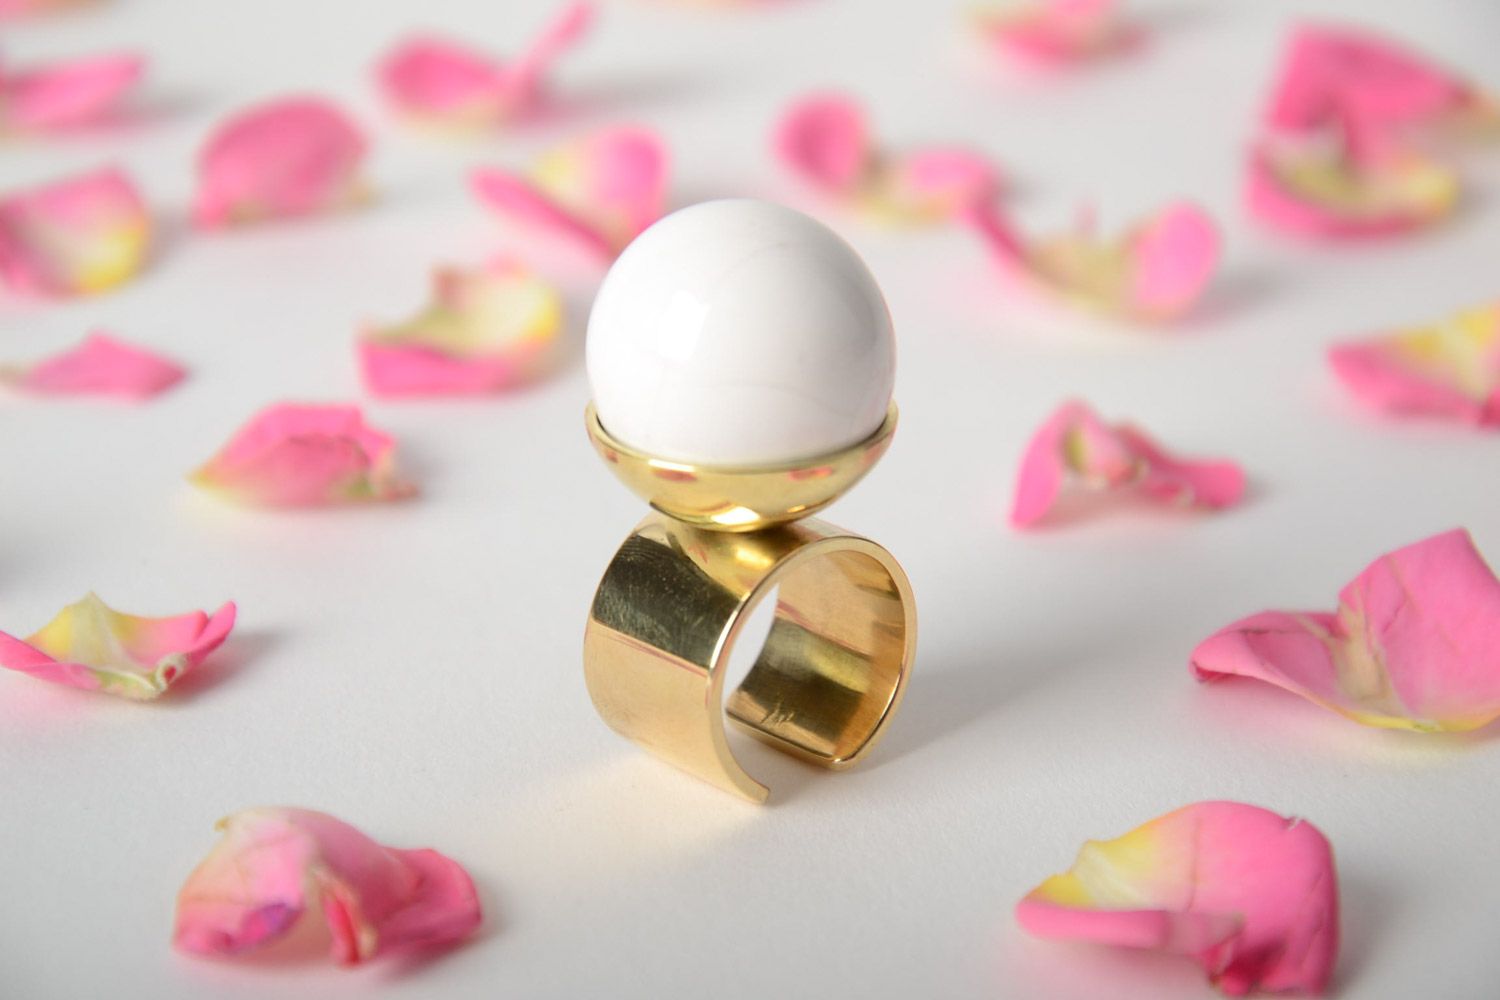 Magnificent handmade adjustable volume metal ring with white porcelain for women photo 1